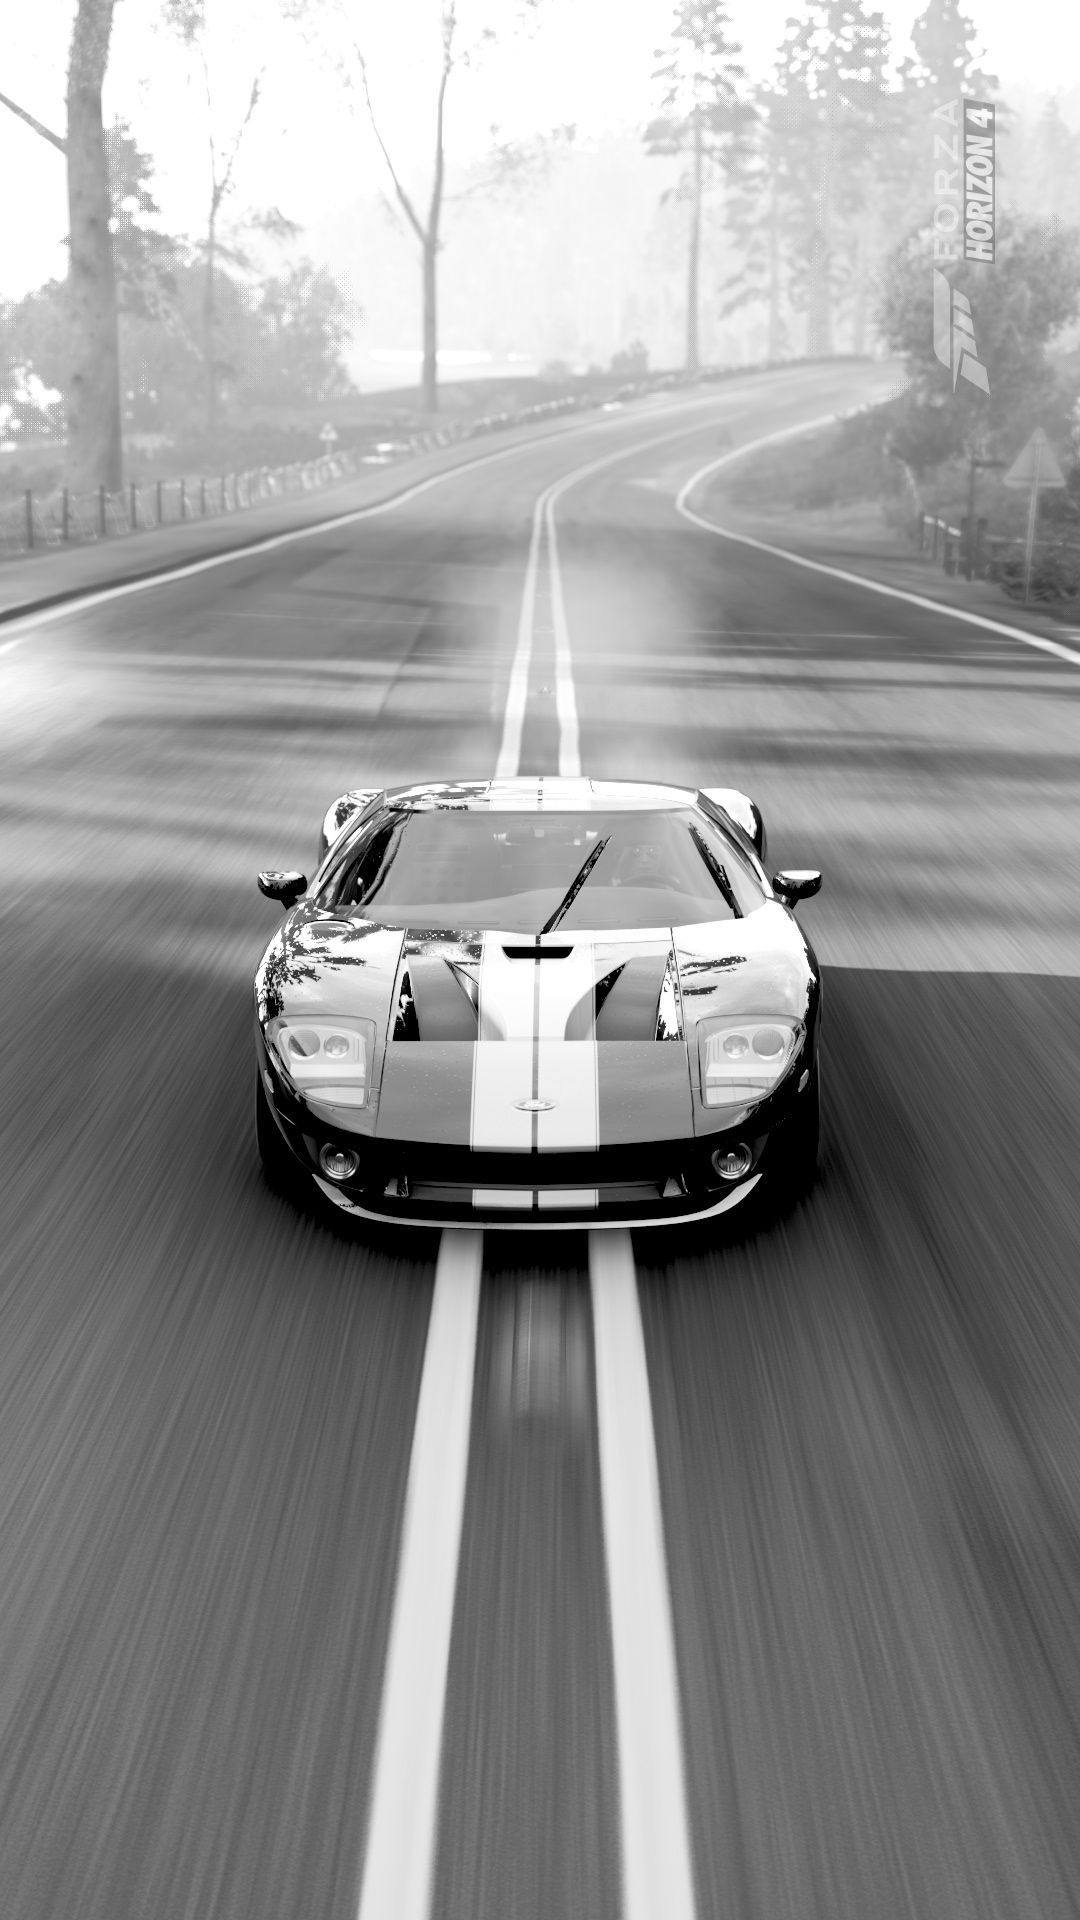 Ford GT Wallpaper [OC]. Ford gt, Ford, Dream cars